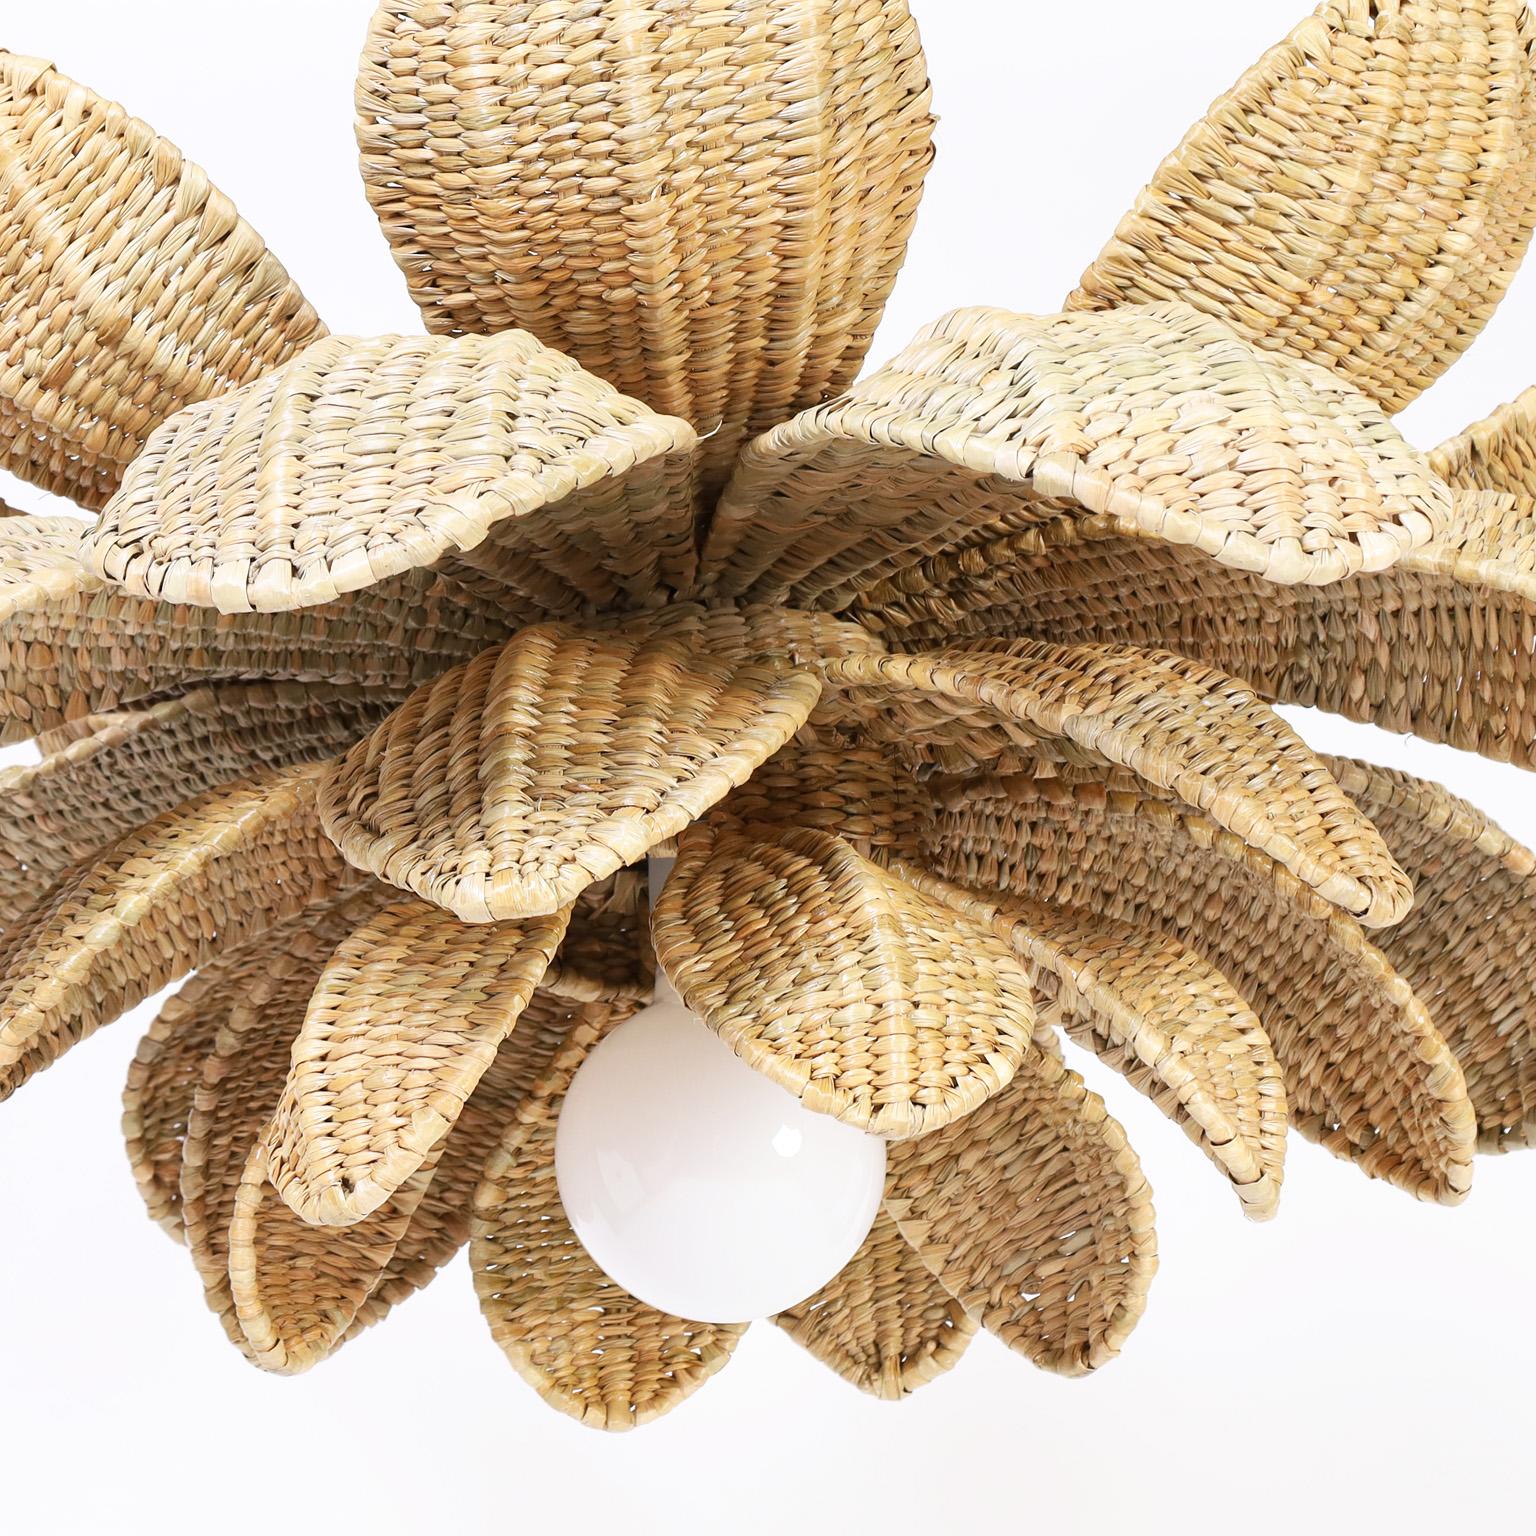 Mid-Century Modern Wicker Lotus Light Fixture or Pendant From the Flores Collection